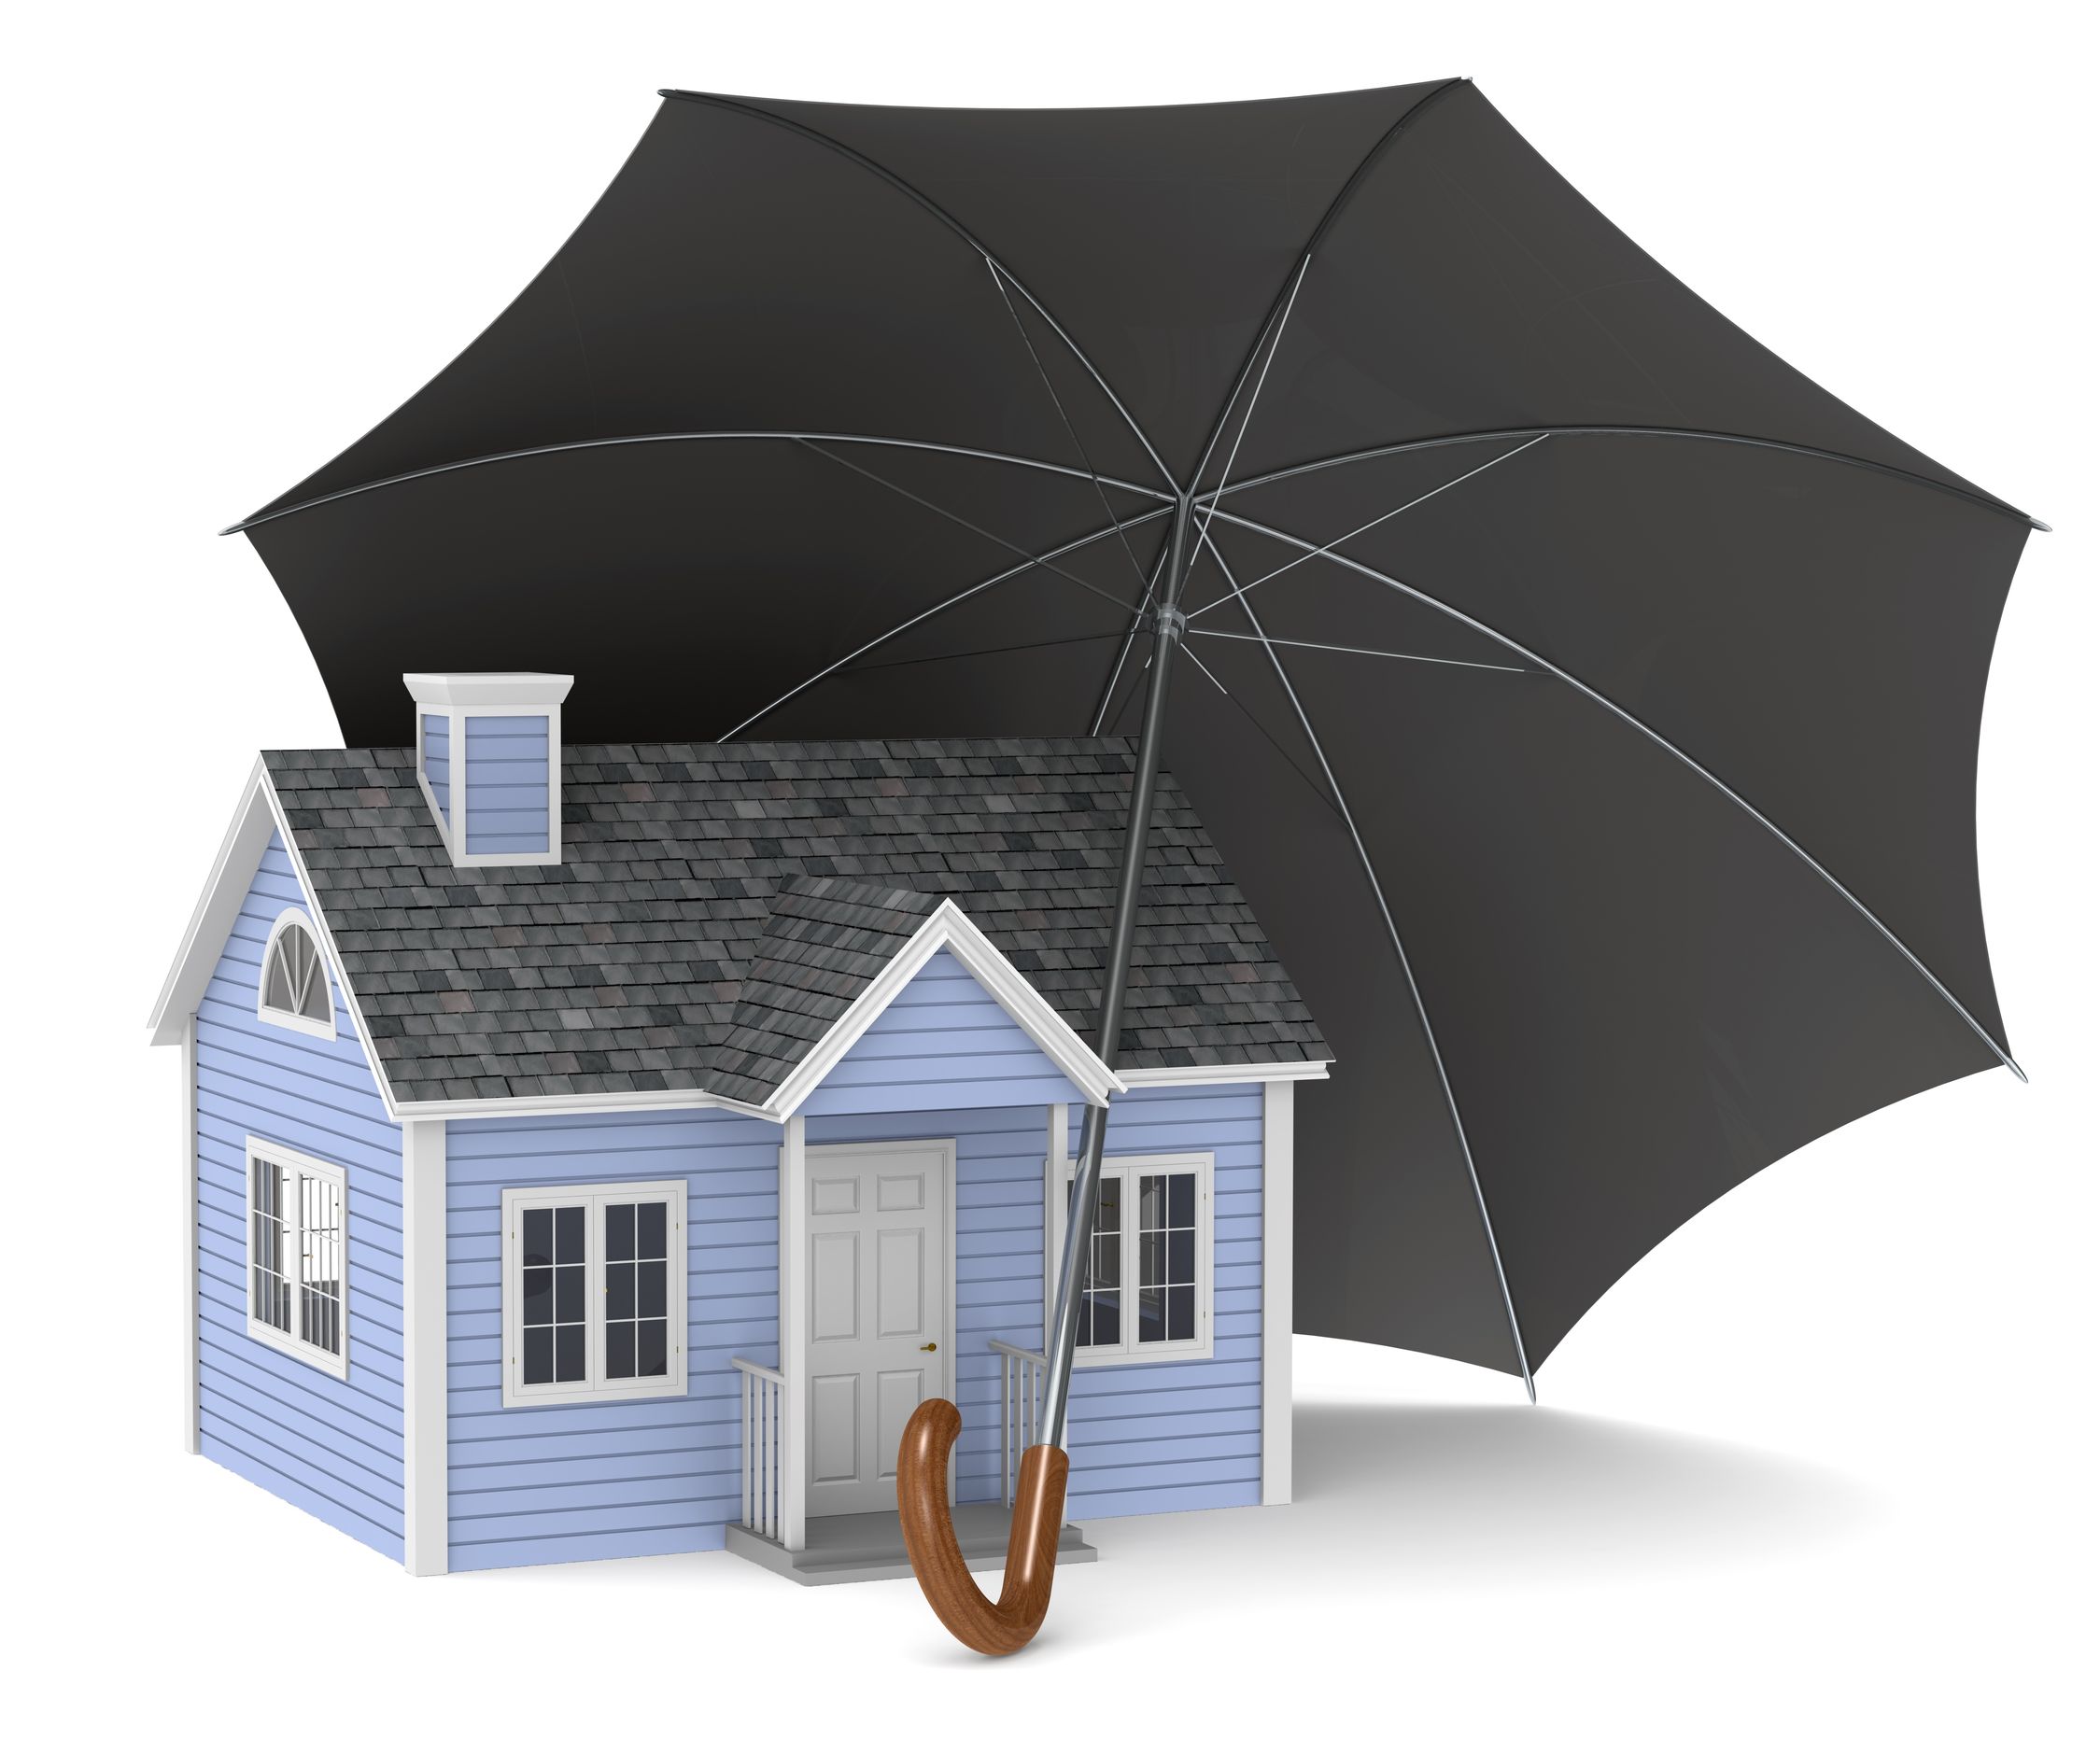 Searching for a Home Insurance Company in Miami, FL